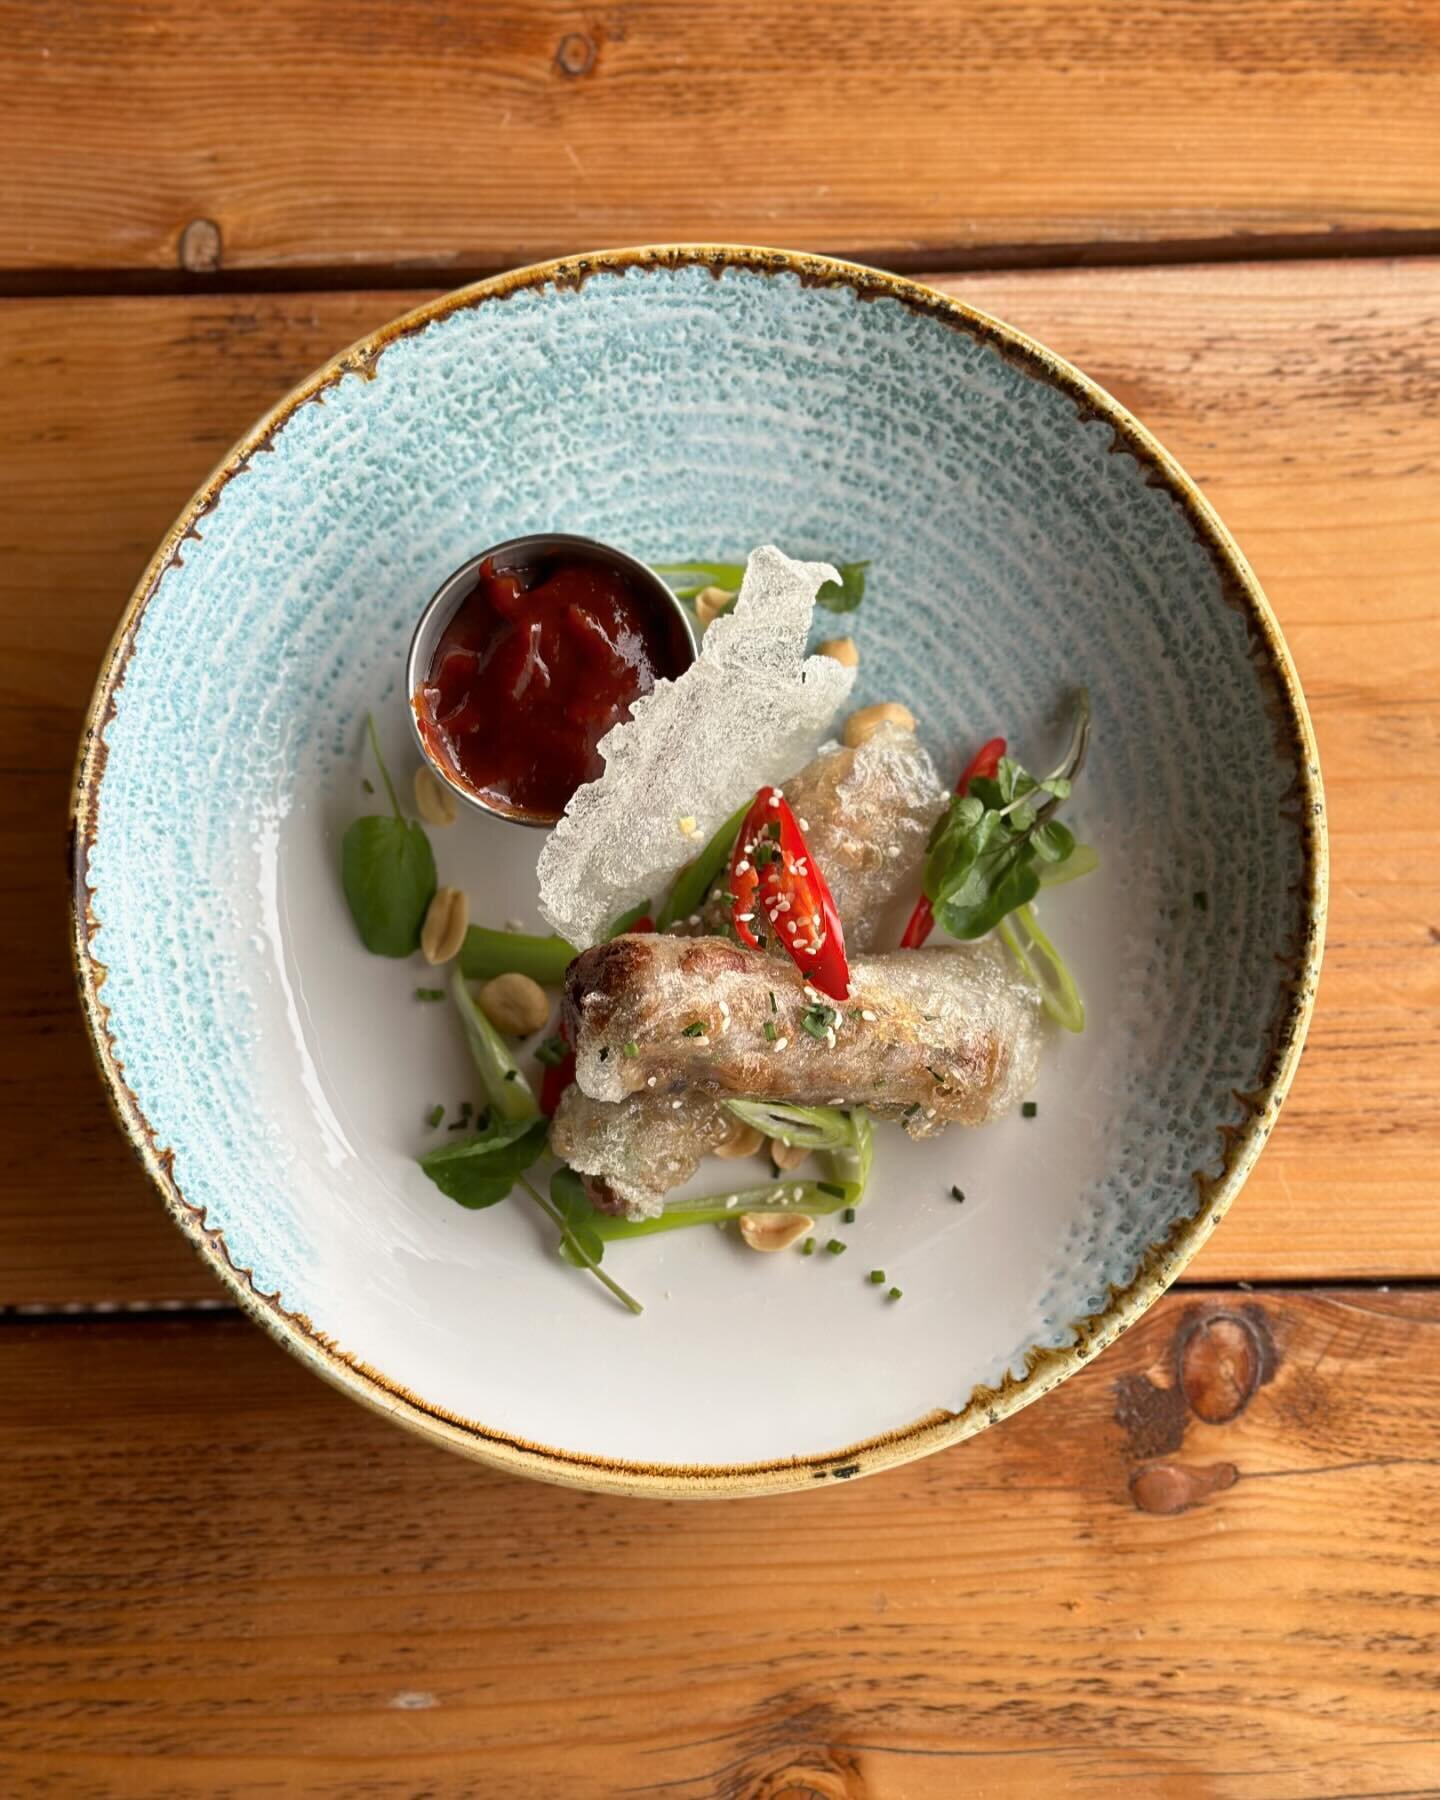 ❀ New Spring Menu ❀

Book your table now: https://www.opentable.co.uk/r/sweeney-hall-hotel-oswestry

Some pics of some of the new small plates:
- Delicious Confit Duck Leg Spring Rolls with Gochujang Ketchup
- Tasty Crab on Sourdough Toast with Lobst